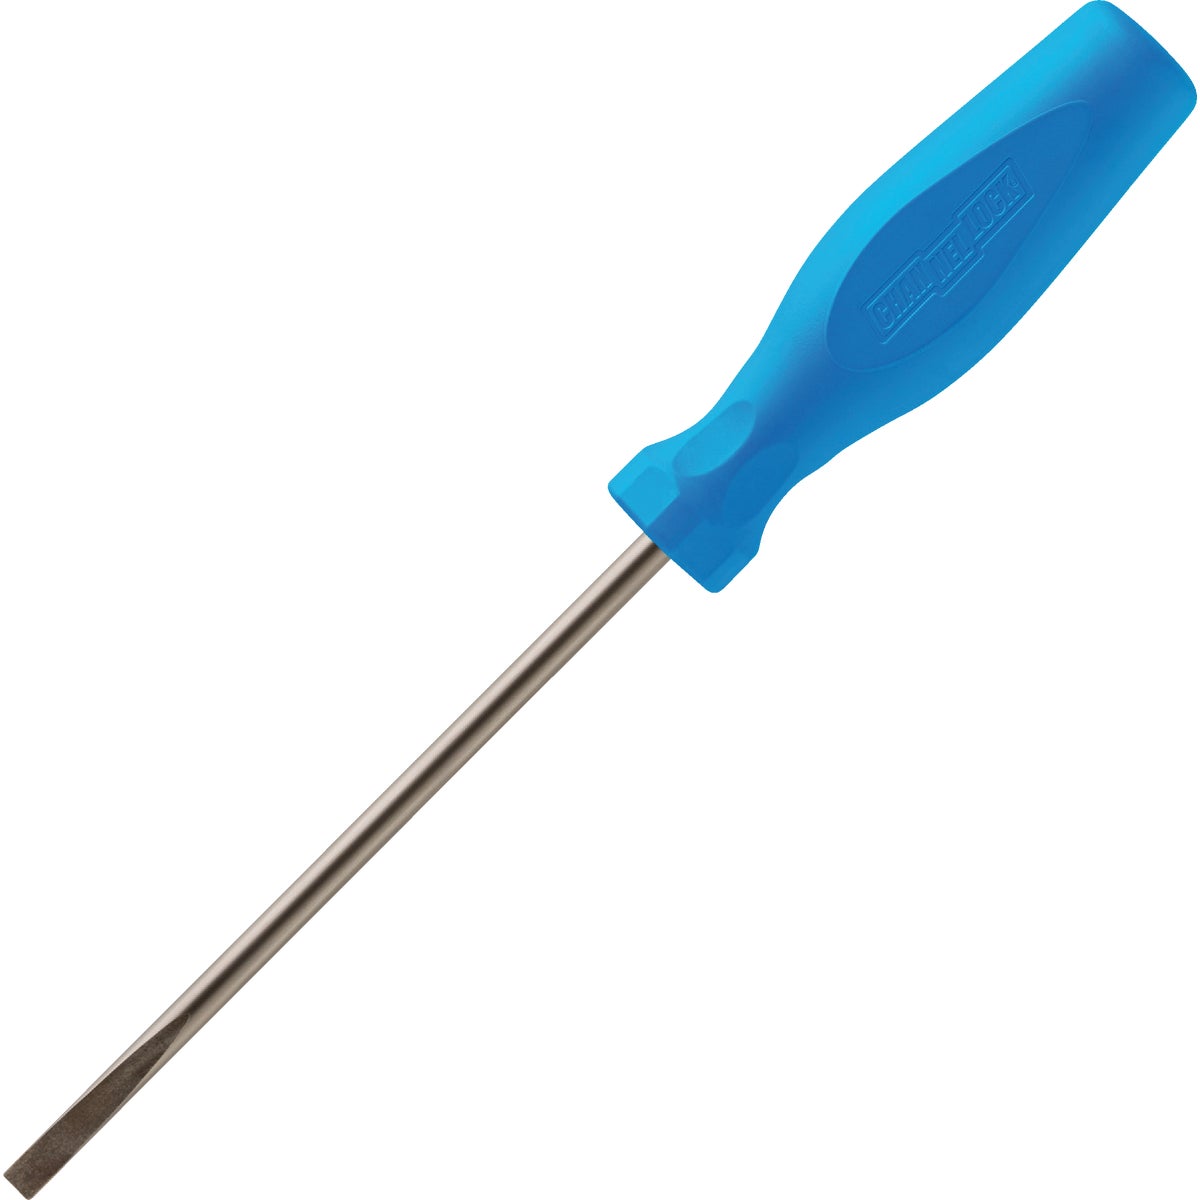 Channellock 1/4 In. x 6 In. Professional Slotted Screwdriver